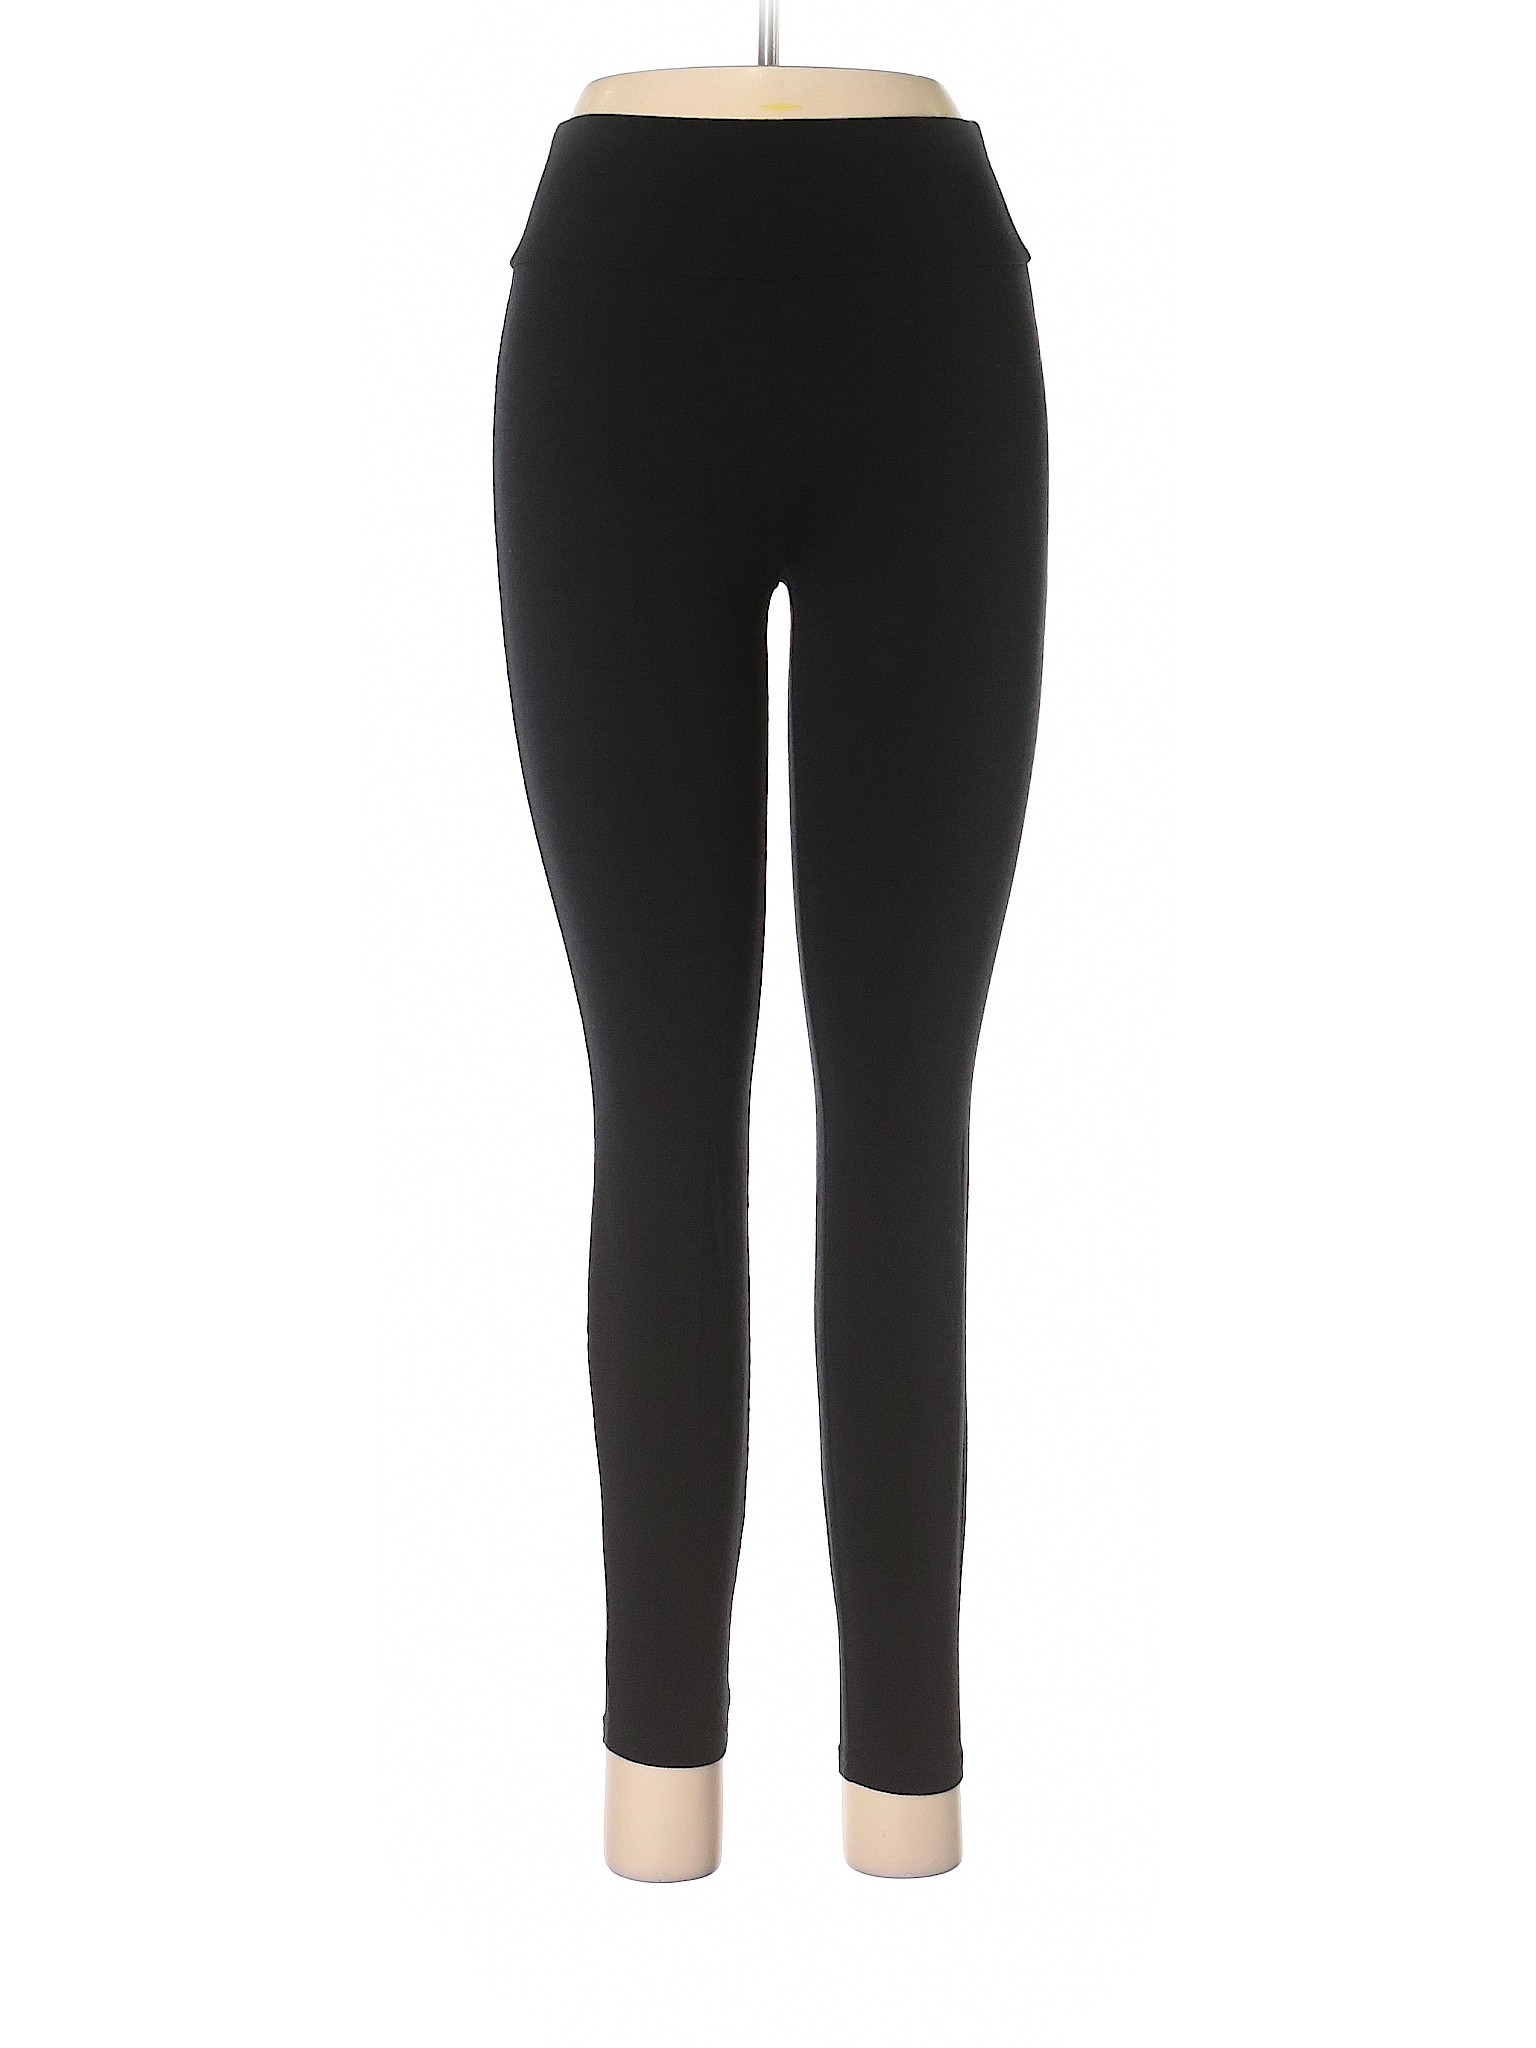 Wild Fable Solid Black Leggings Size S - 60% off | thredUP